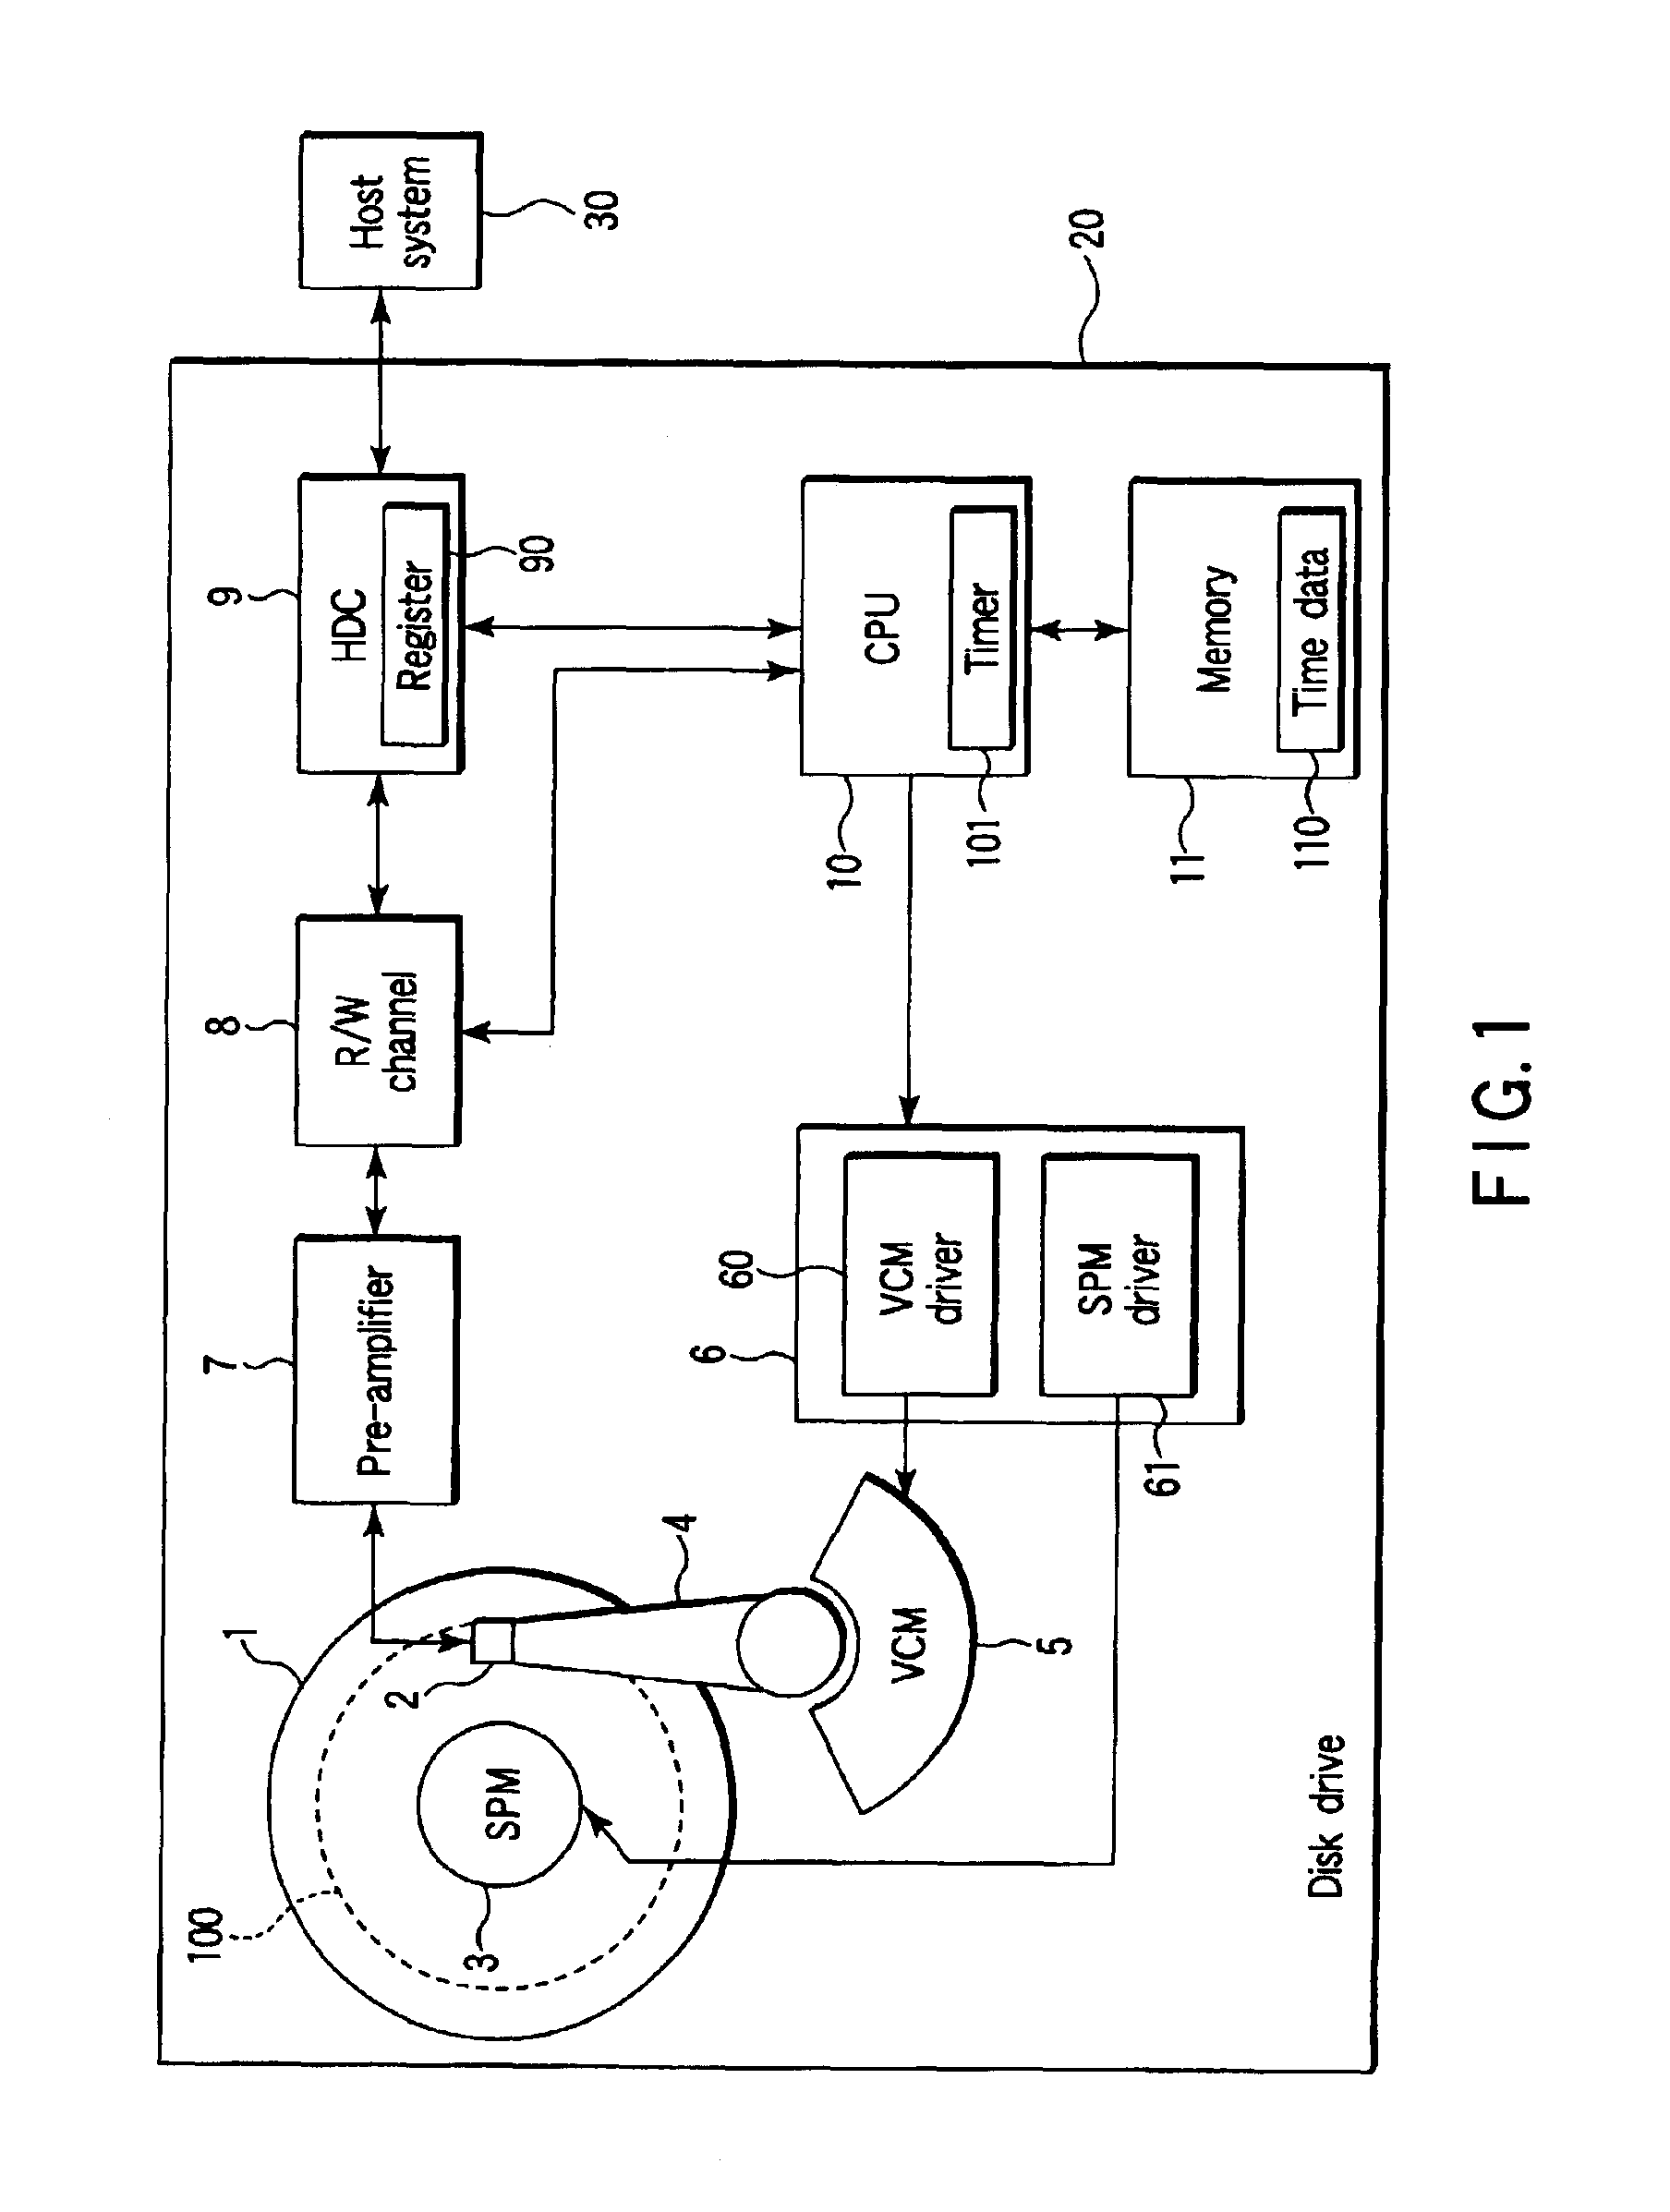 Method and apparatus for event management in a disk drive